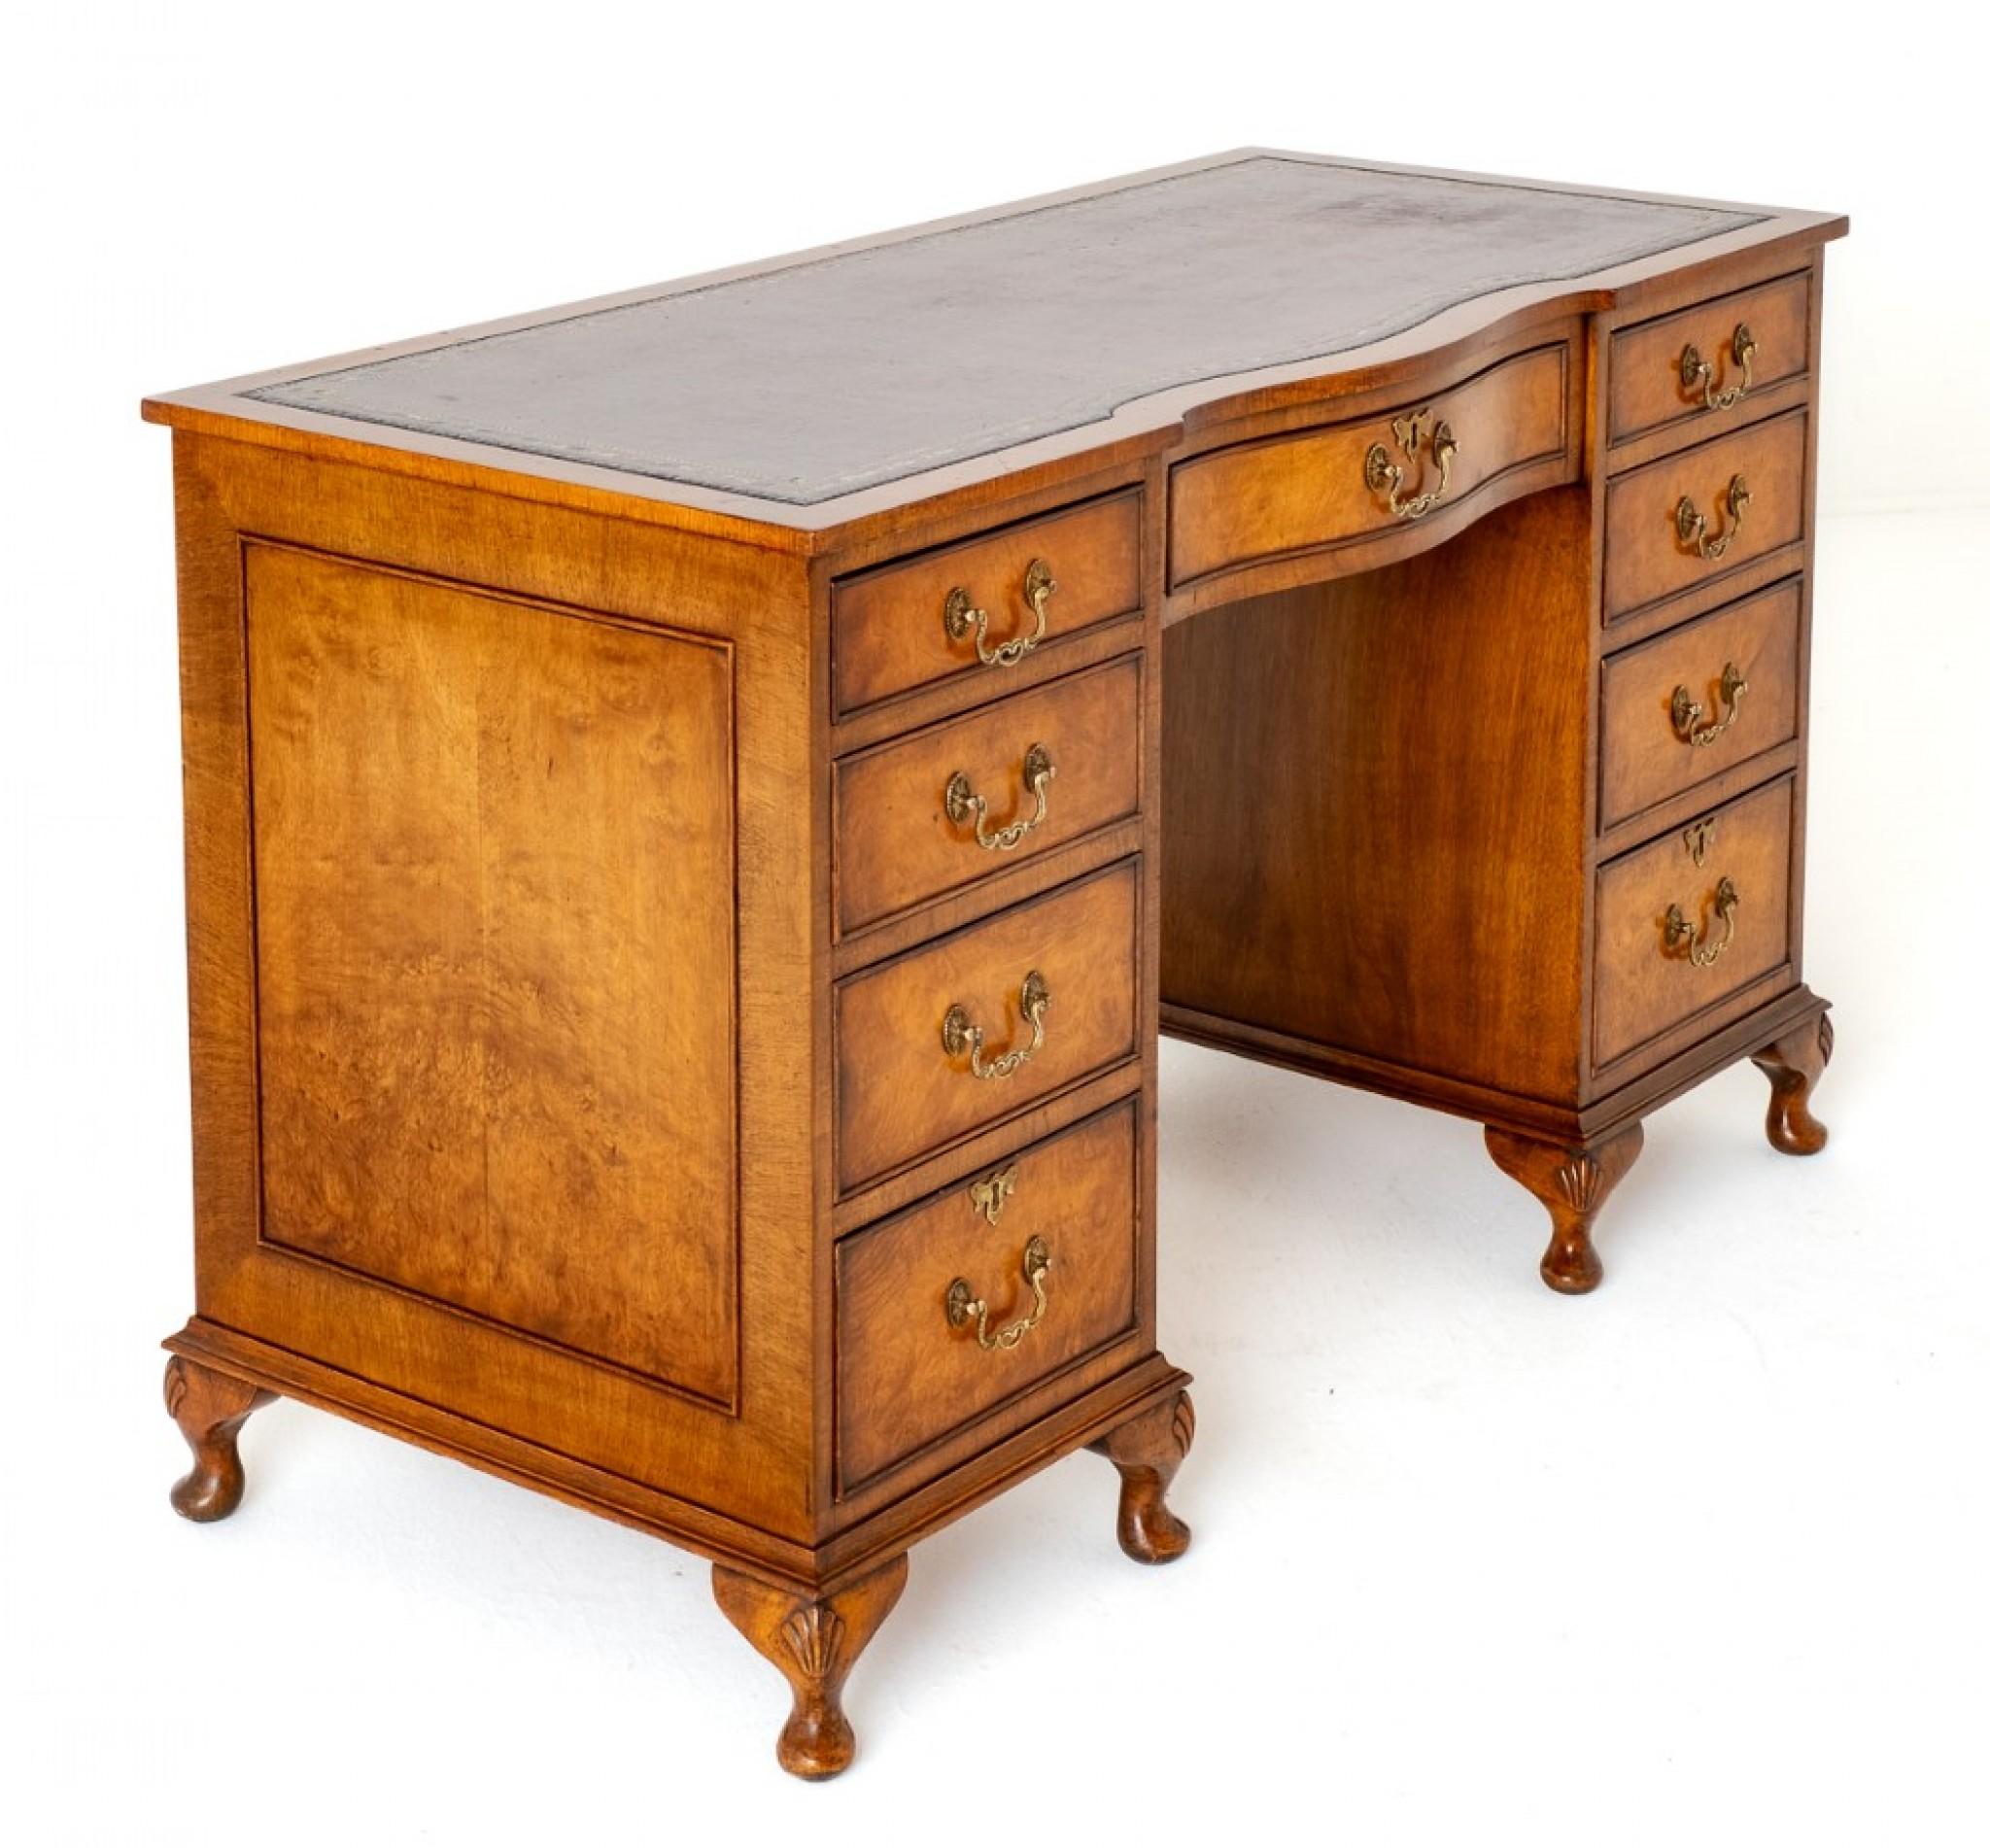 Queen Anne Style Walnut Pedestal Desk.
This Desk is Raised upon Squat Cabriole Legs with Carved Knees.
Having an Arrangement of 9 Mahogany Lined Drawers, the Centre Drawer Being of a Shaped Form.
The Drawers Retain their Decorative Brass Swan Neck